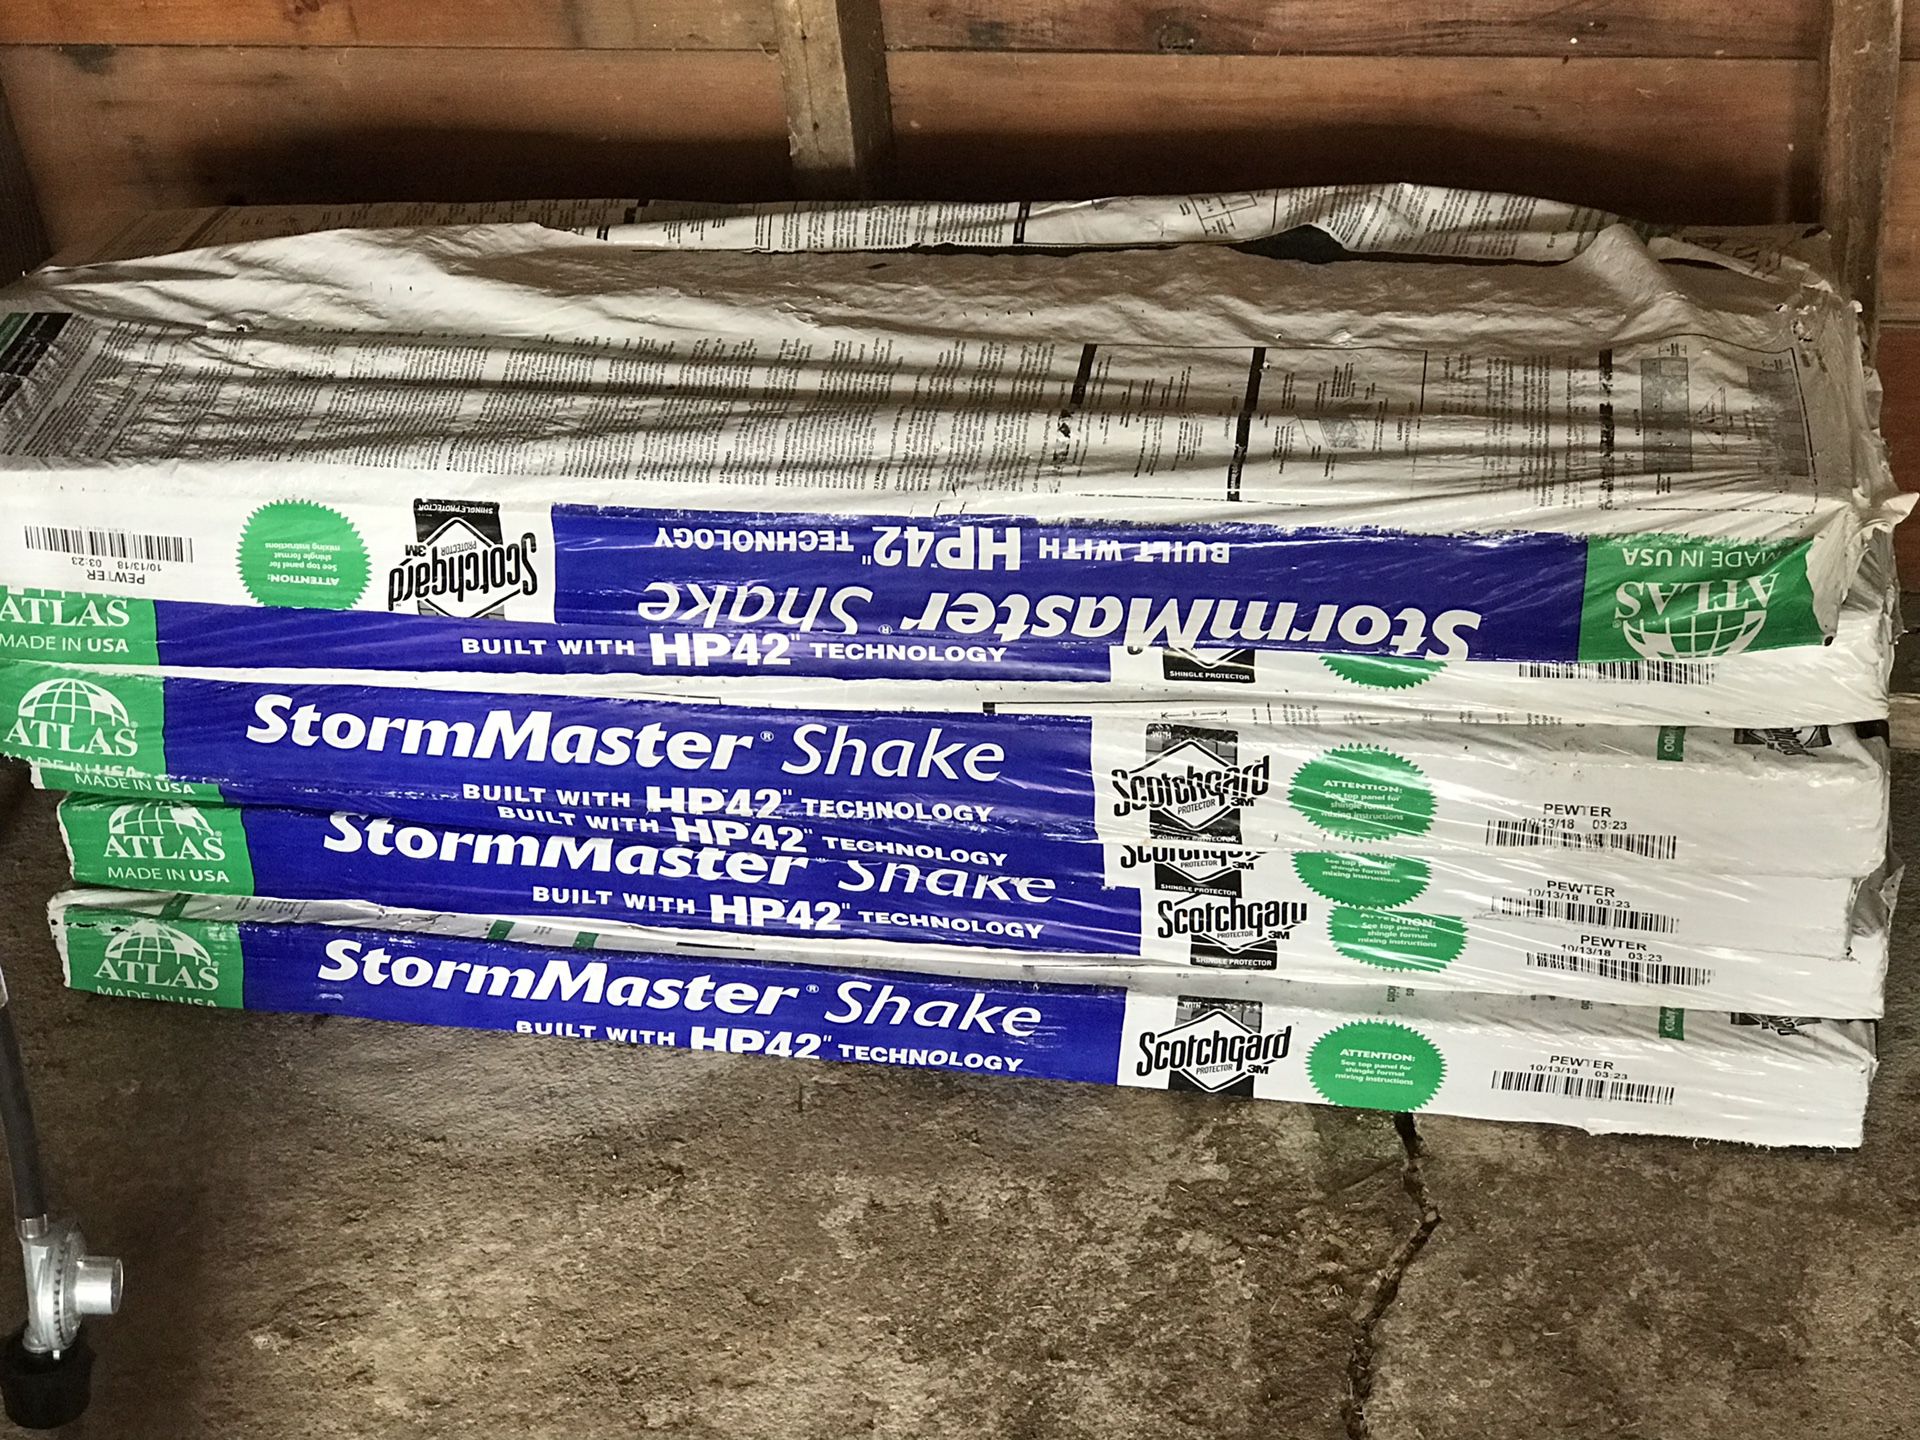 6 bundles of Atlas Storm Master Shake HP42 shingles and 6 roof panels 97 by 48. Also included is some roof tarp. Asking $280.00 or Best Offer.